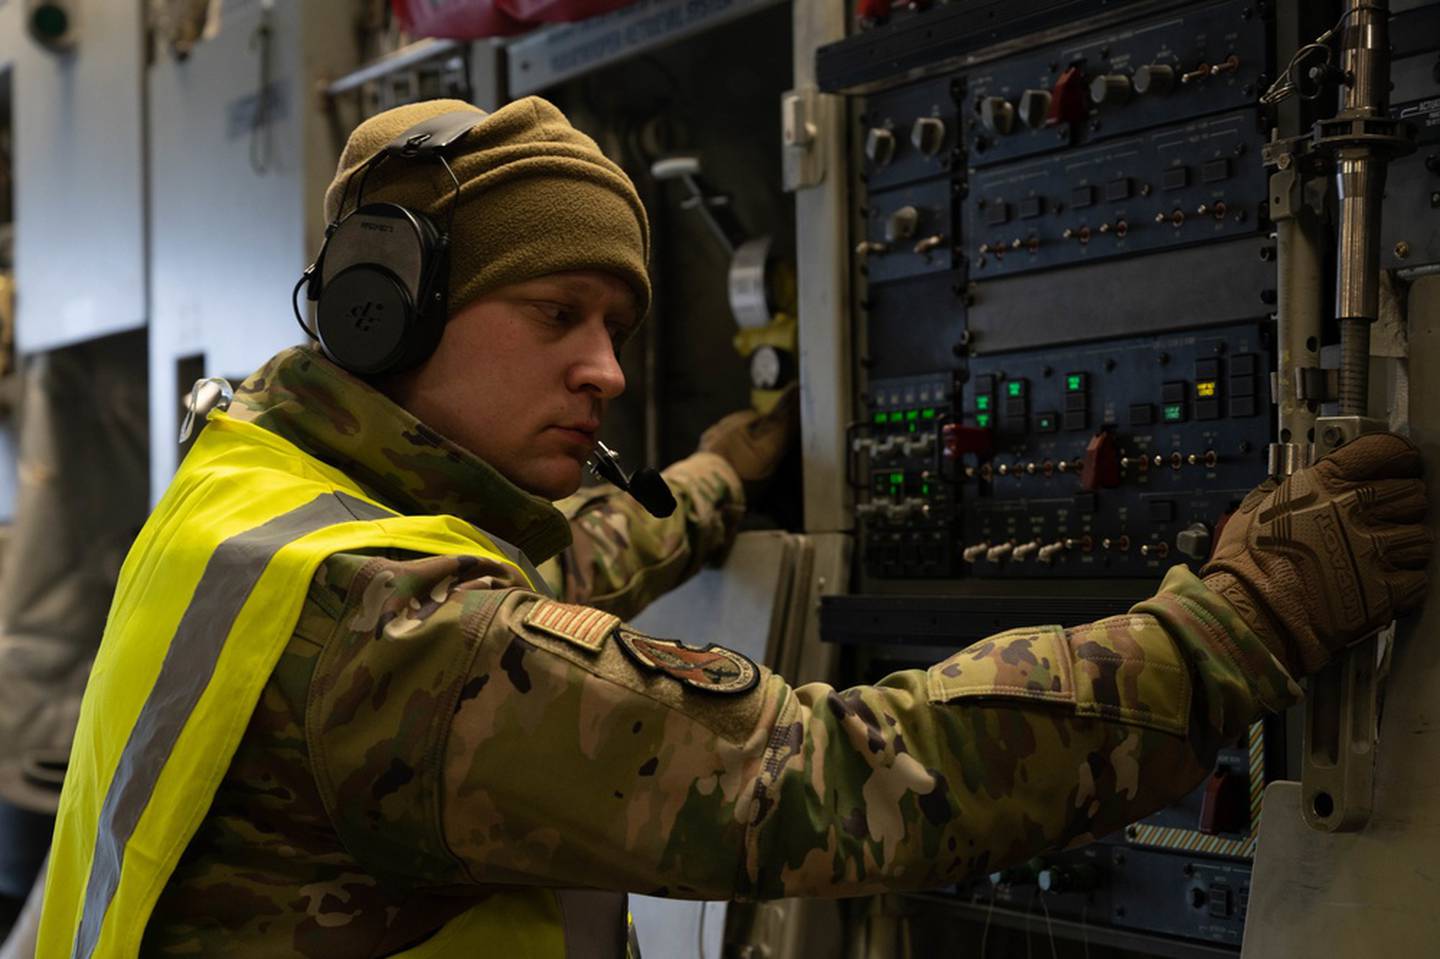 A U.S. Air Force airman assigned to the 435th Contingency Response Group waits for further instruction on a C-17 Globemaster III assigned to the 62nd Airlift Wing from Joint Base Lewis-McChord, Washington, in Rzeszów-Jasionka Airport, Poland, Feb. 8, 2022. Approximately 150 personnel from the 435th Air Ground Operations Wing deployed to support NATO allies and partners, specializing in combat communications, air traffic control, cargo transportation and airfield management. (Senior Airman Taylor Slater/Air Force)